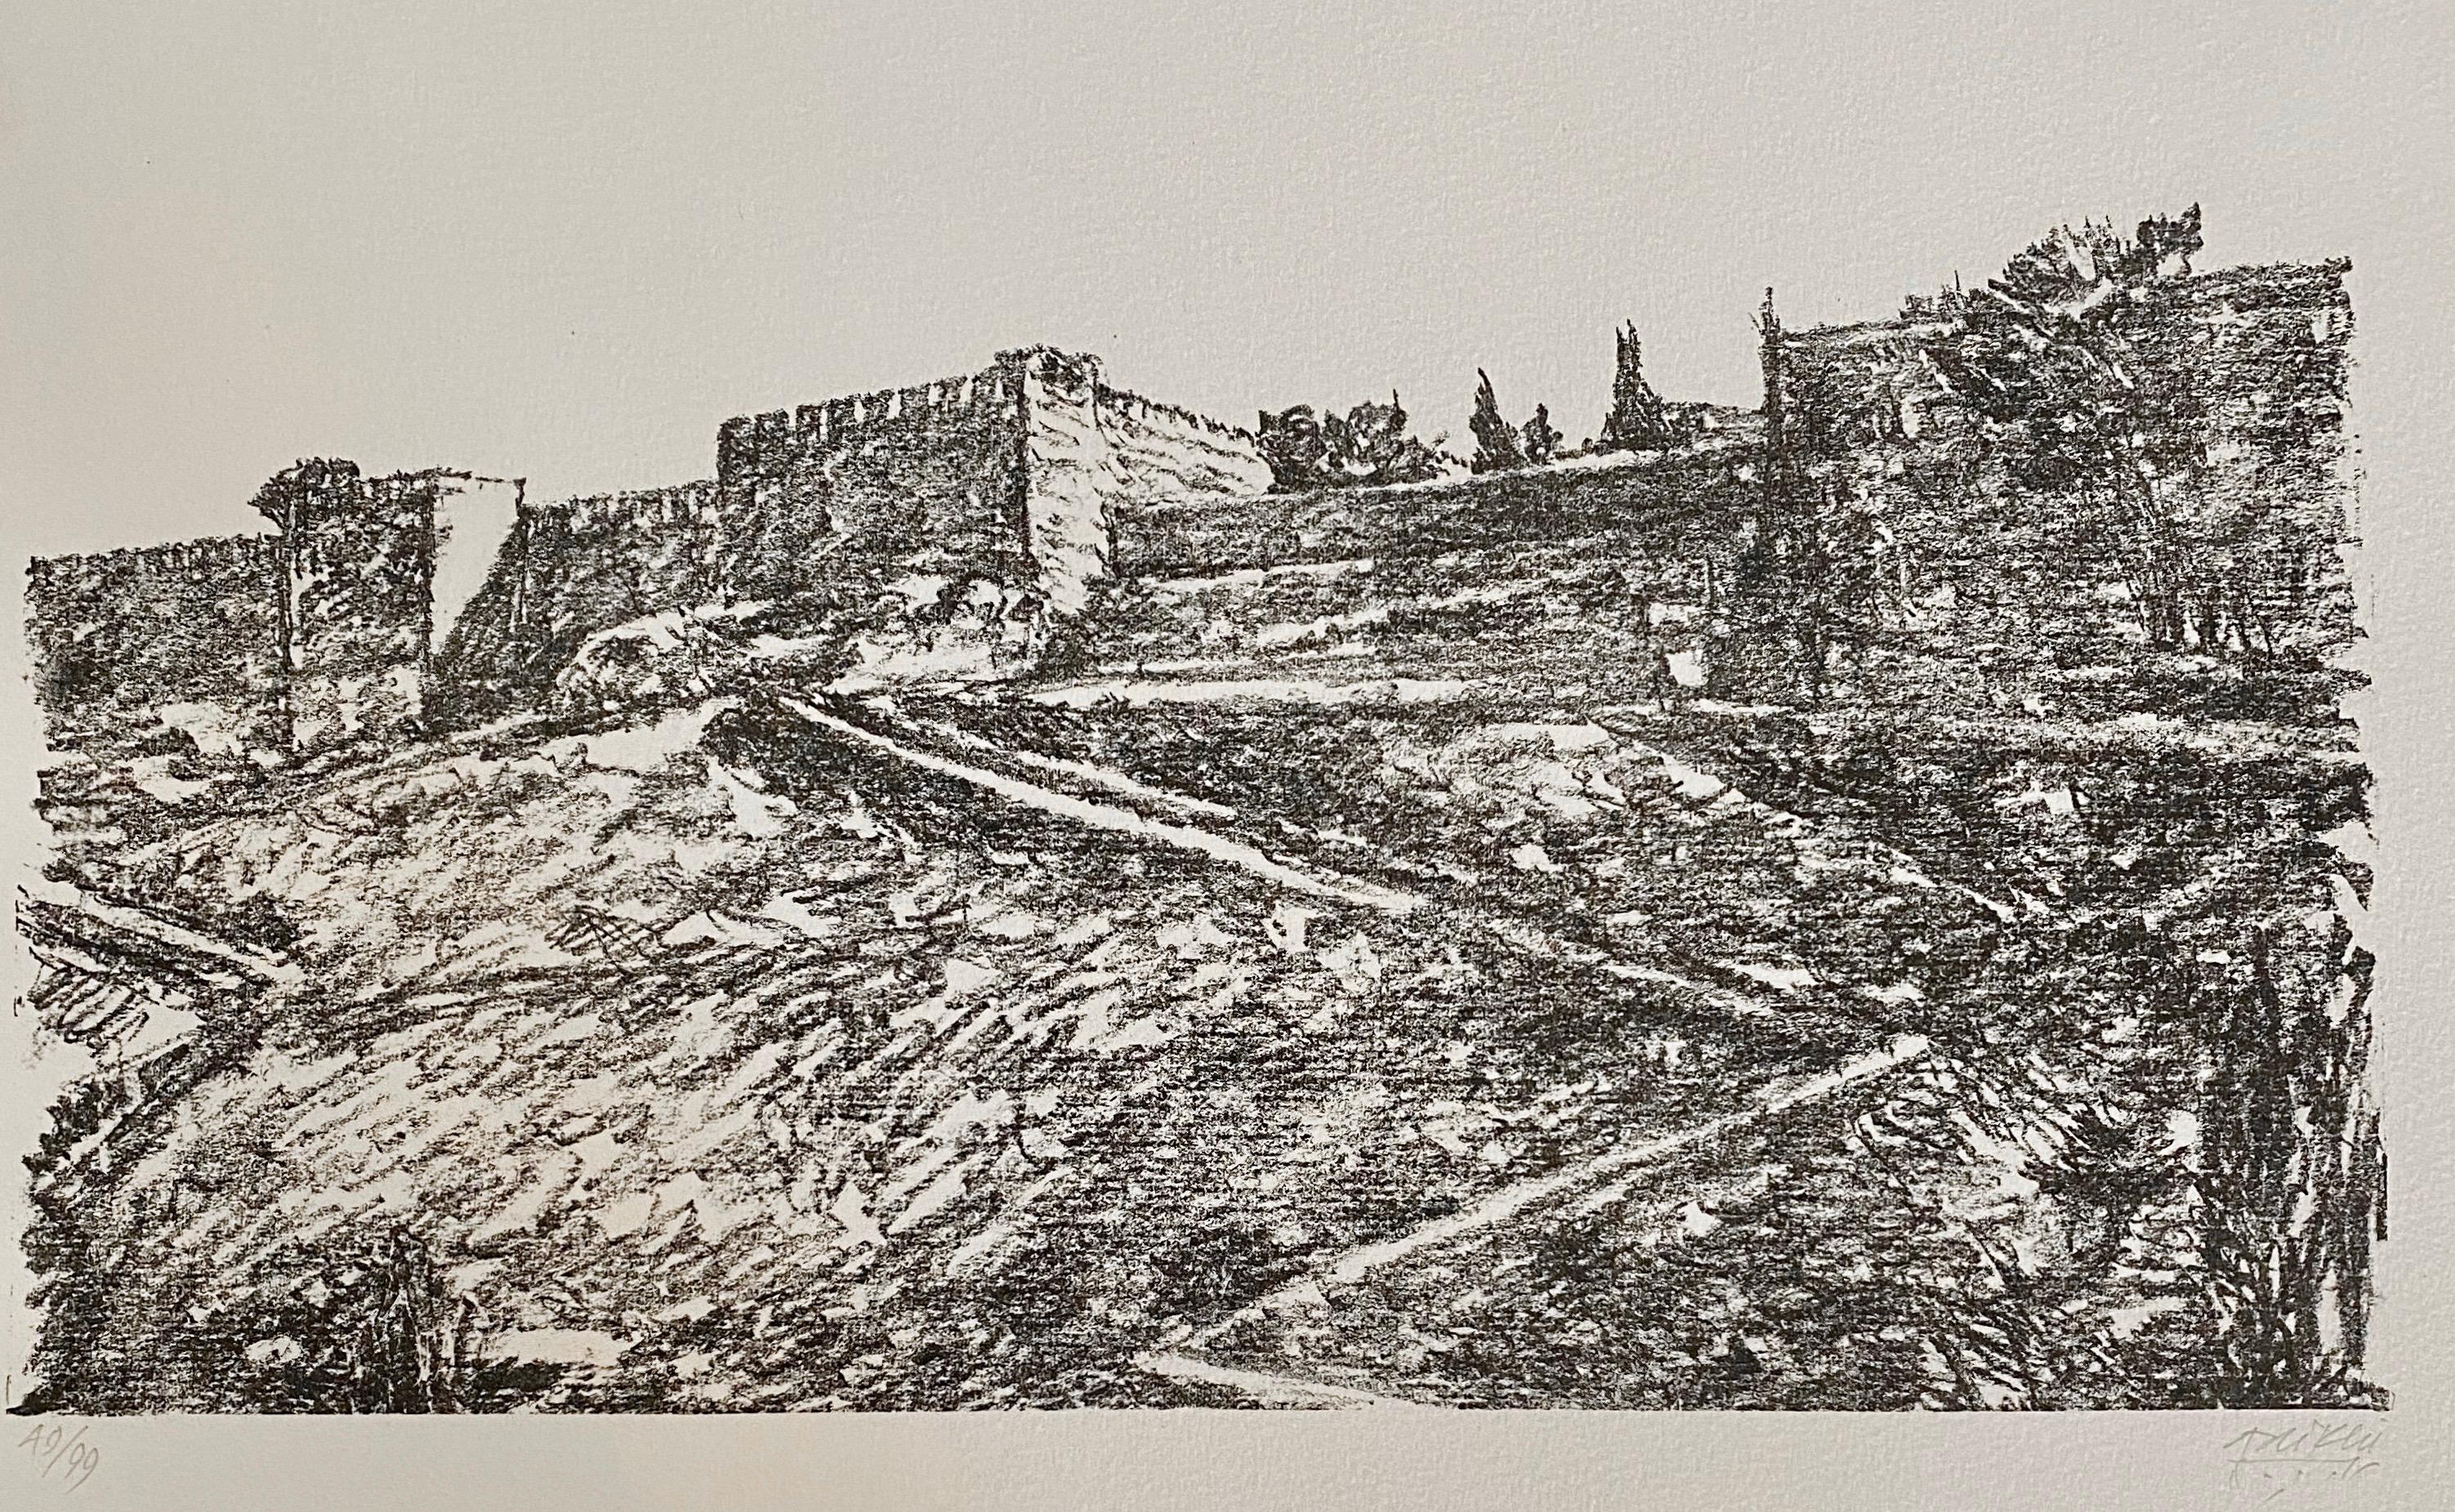 Hand signed in pencil and hand numbered lithograph on fine French Arches paper.
Jerusalem Landscape.

Avigdor Arikha (April 28, 1929 – April 29, 2010) was a Romanian-born French–Israeli painter, draughtsman, printmaker, and art historian.
Avigdor